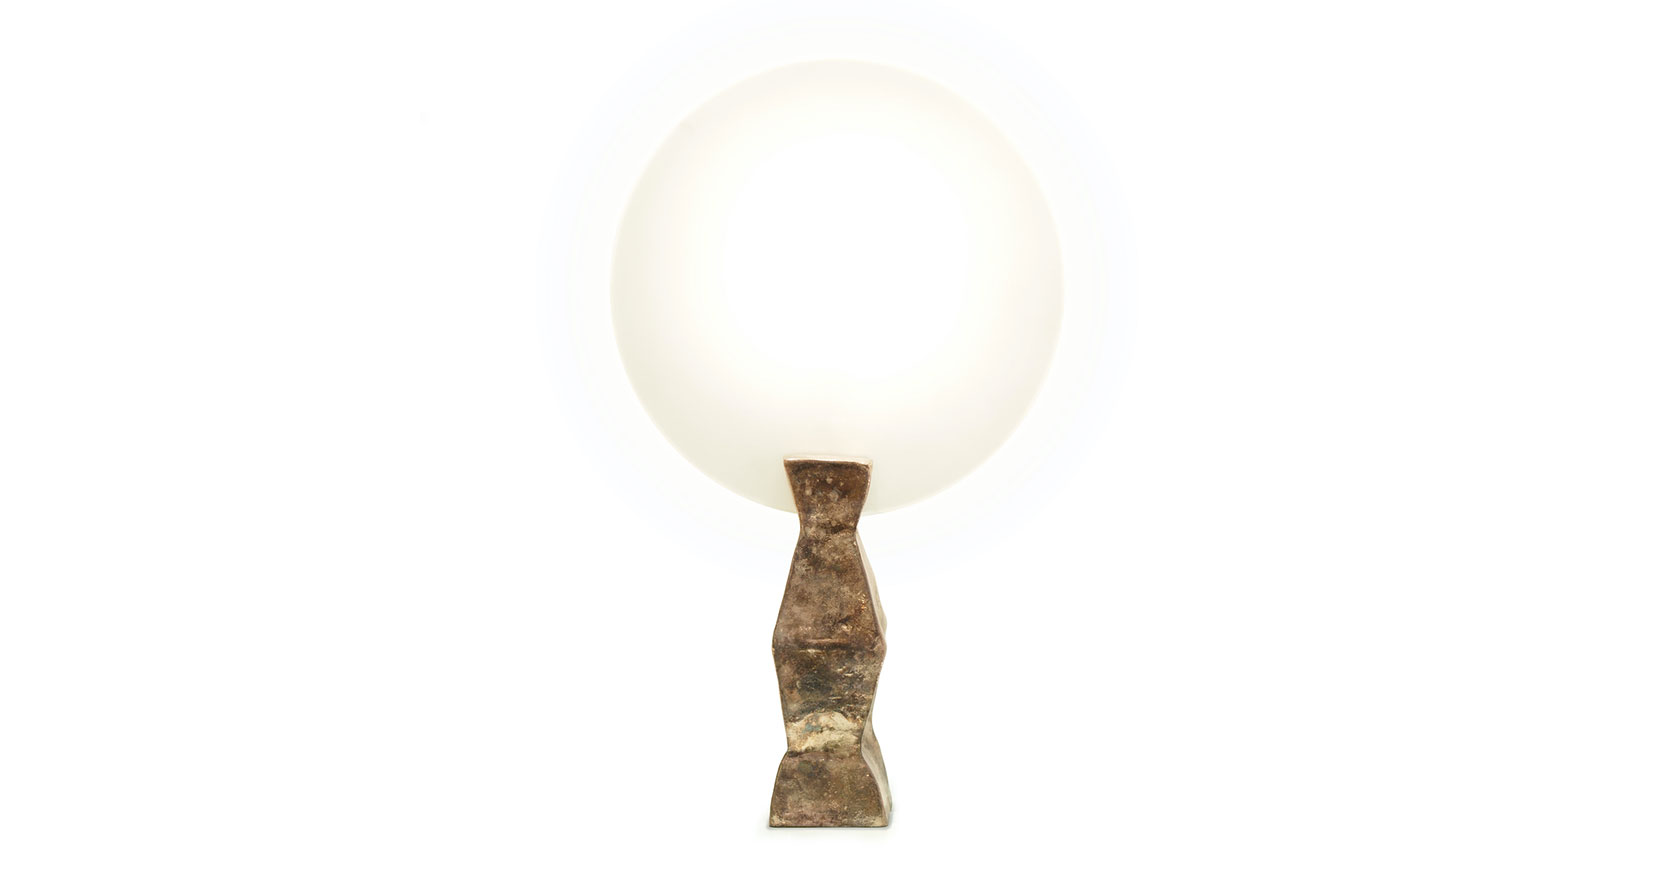 Garouste Bonetti, iconic lamp with a base in gold bronze in the shape of an african totem, supporting a sandblasted glass disc